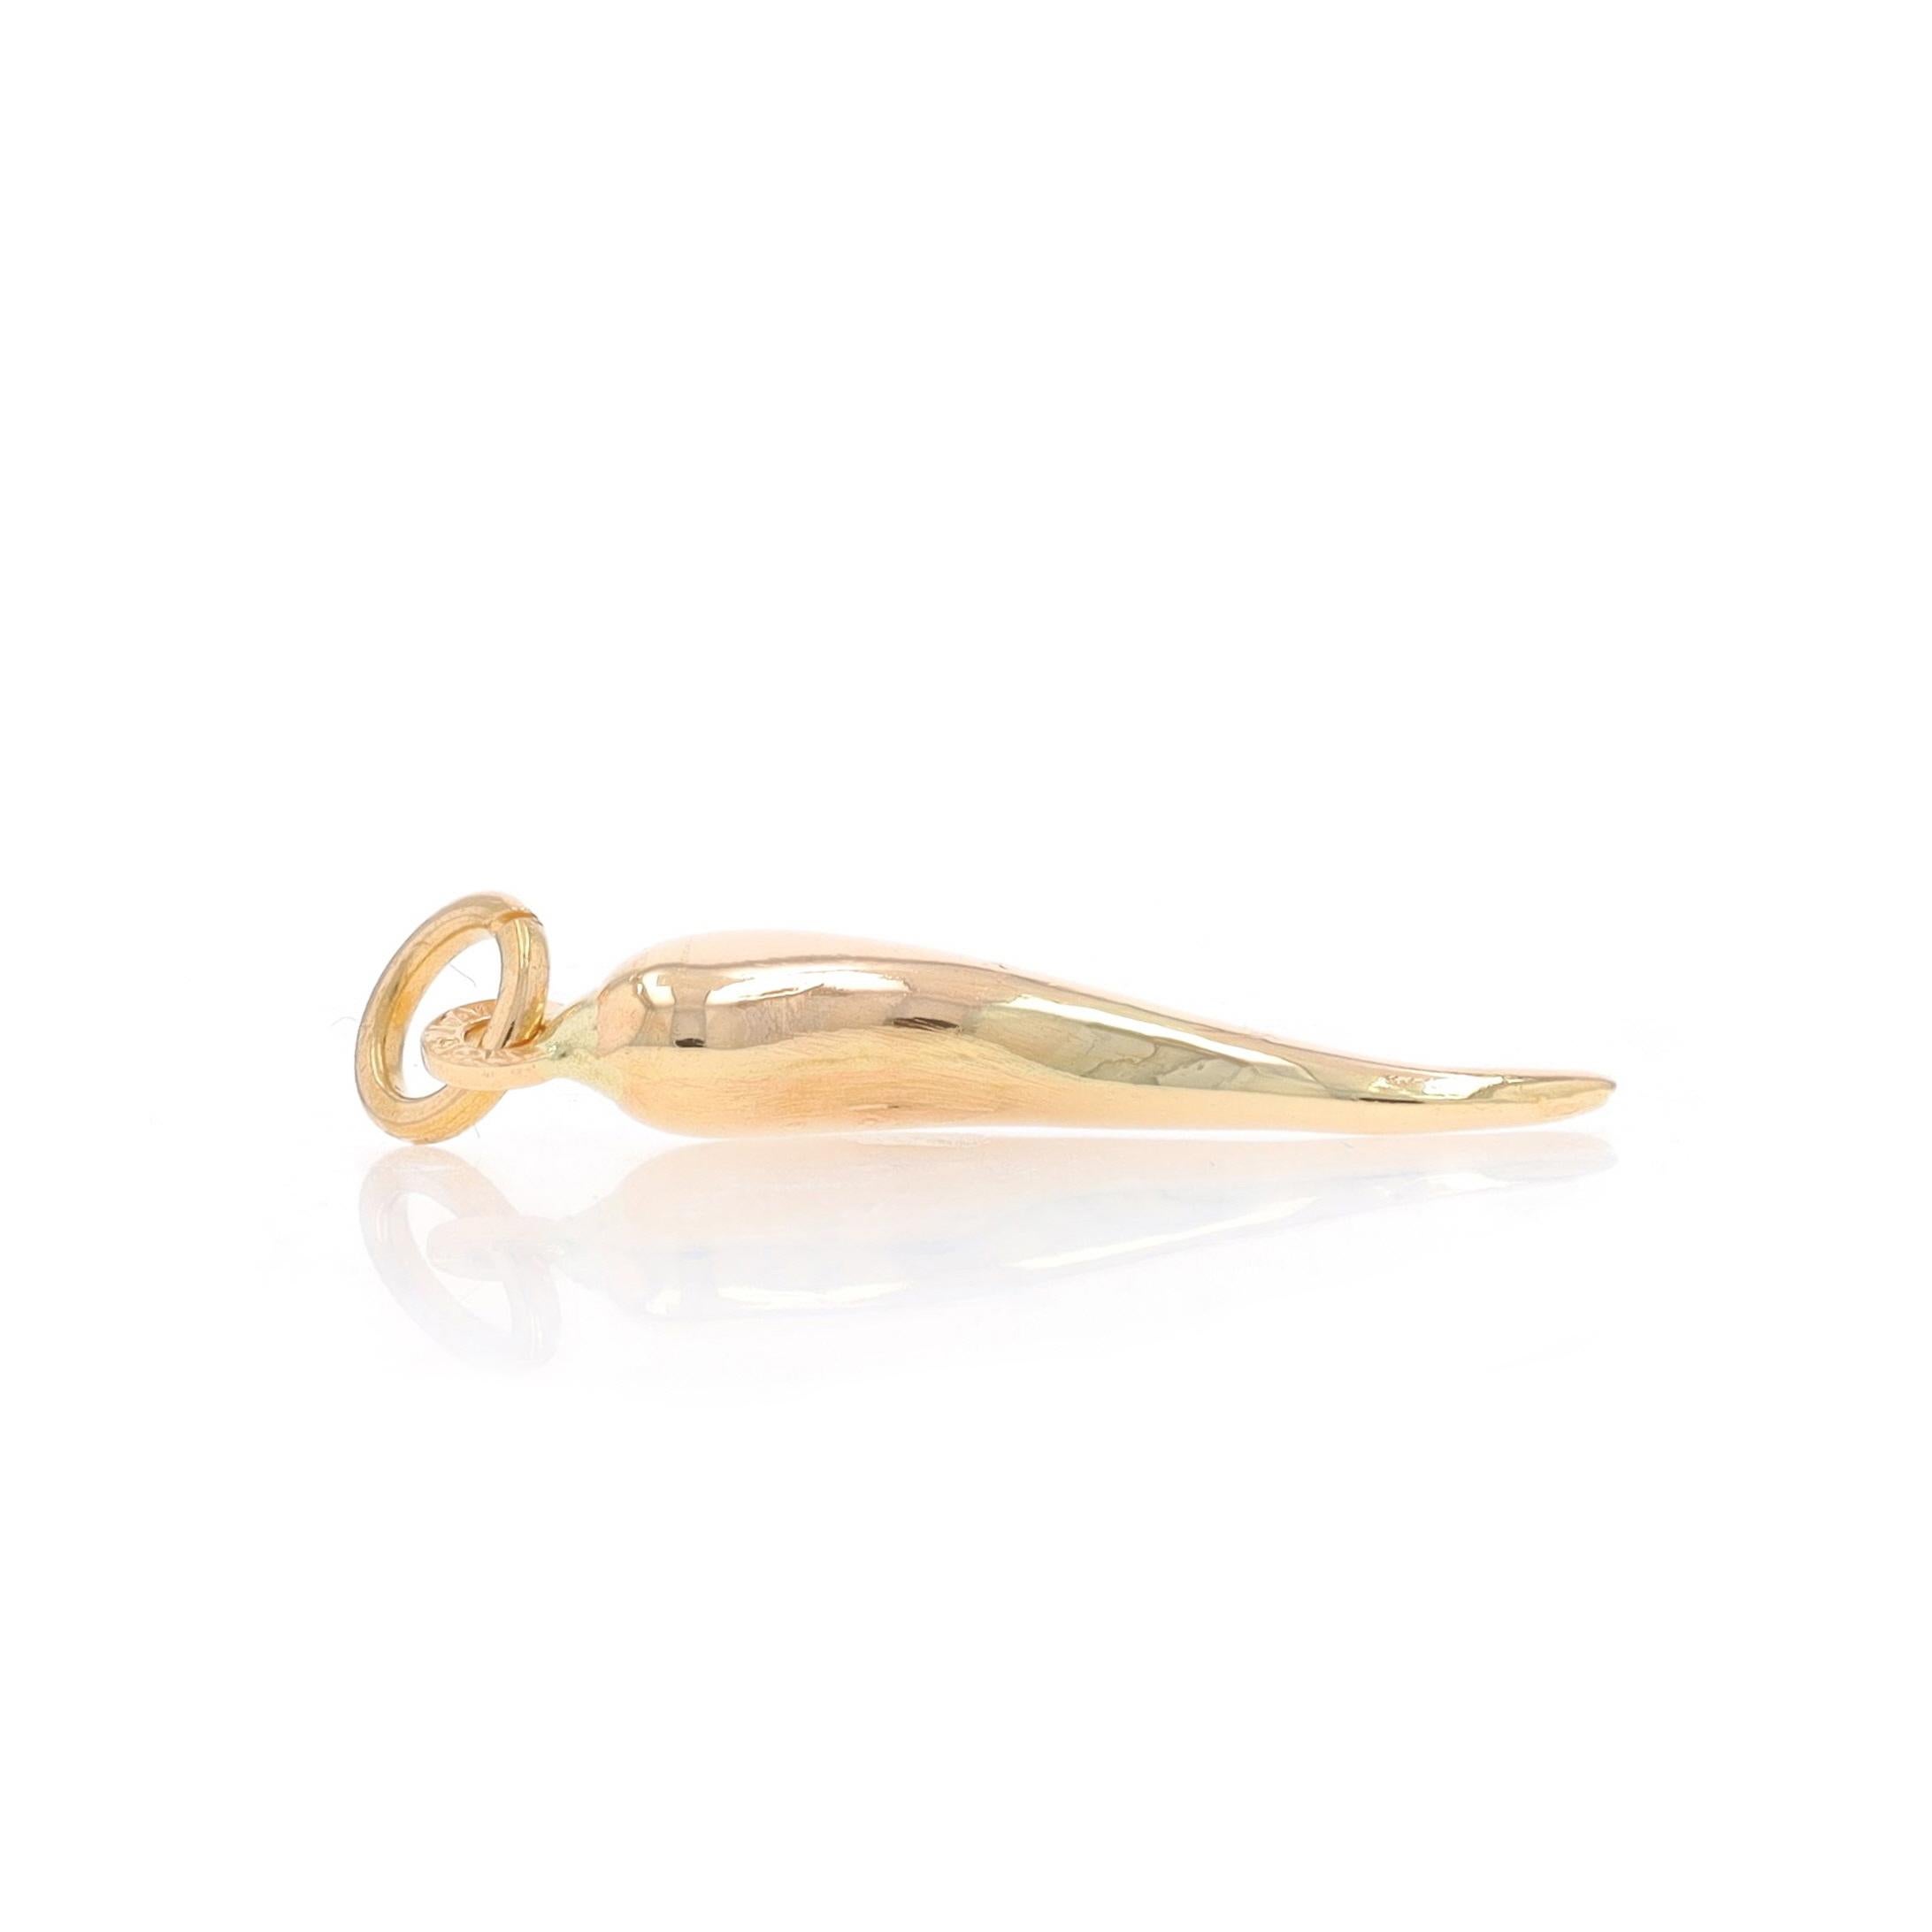 Metal Content: 18k Yellow Gold

Theme: Italian Horn, Good Luck
Features: Hollow Construction

Measurements

Tall (from stationary bail): 1 5/32